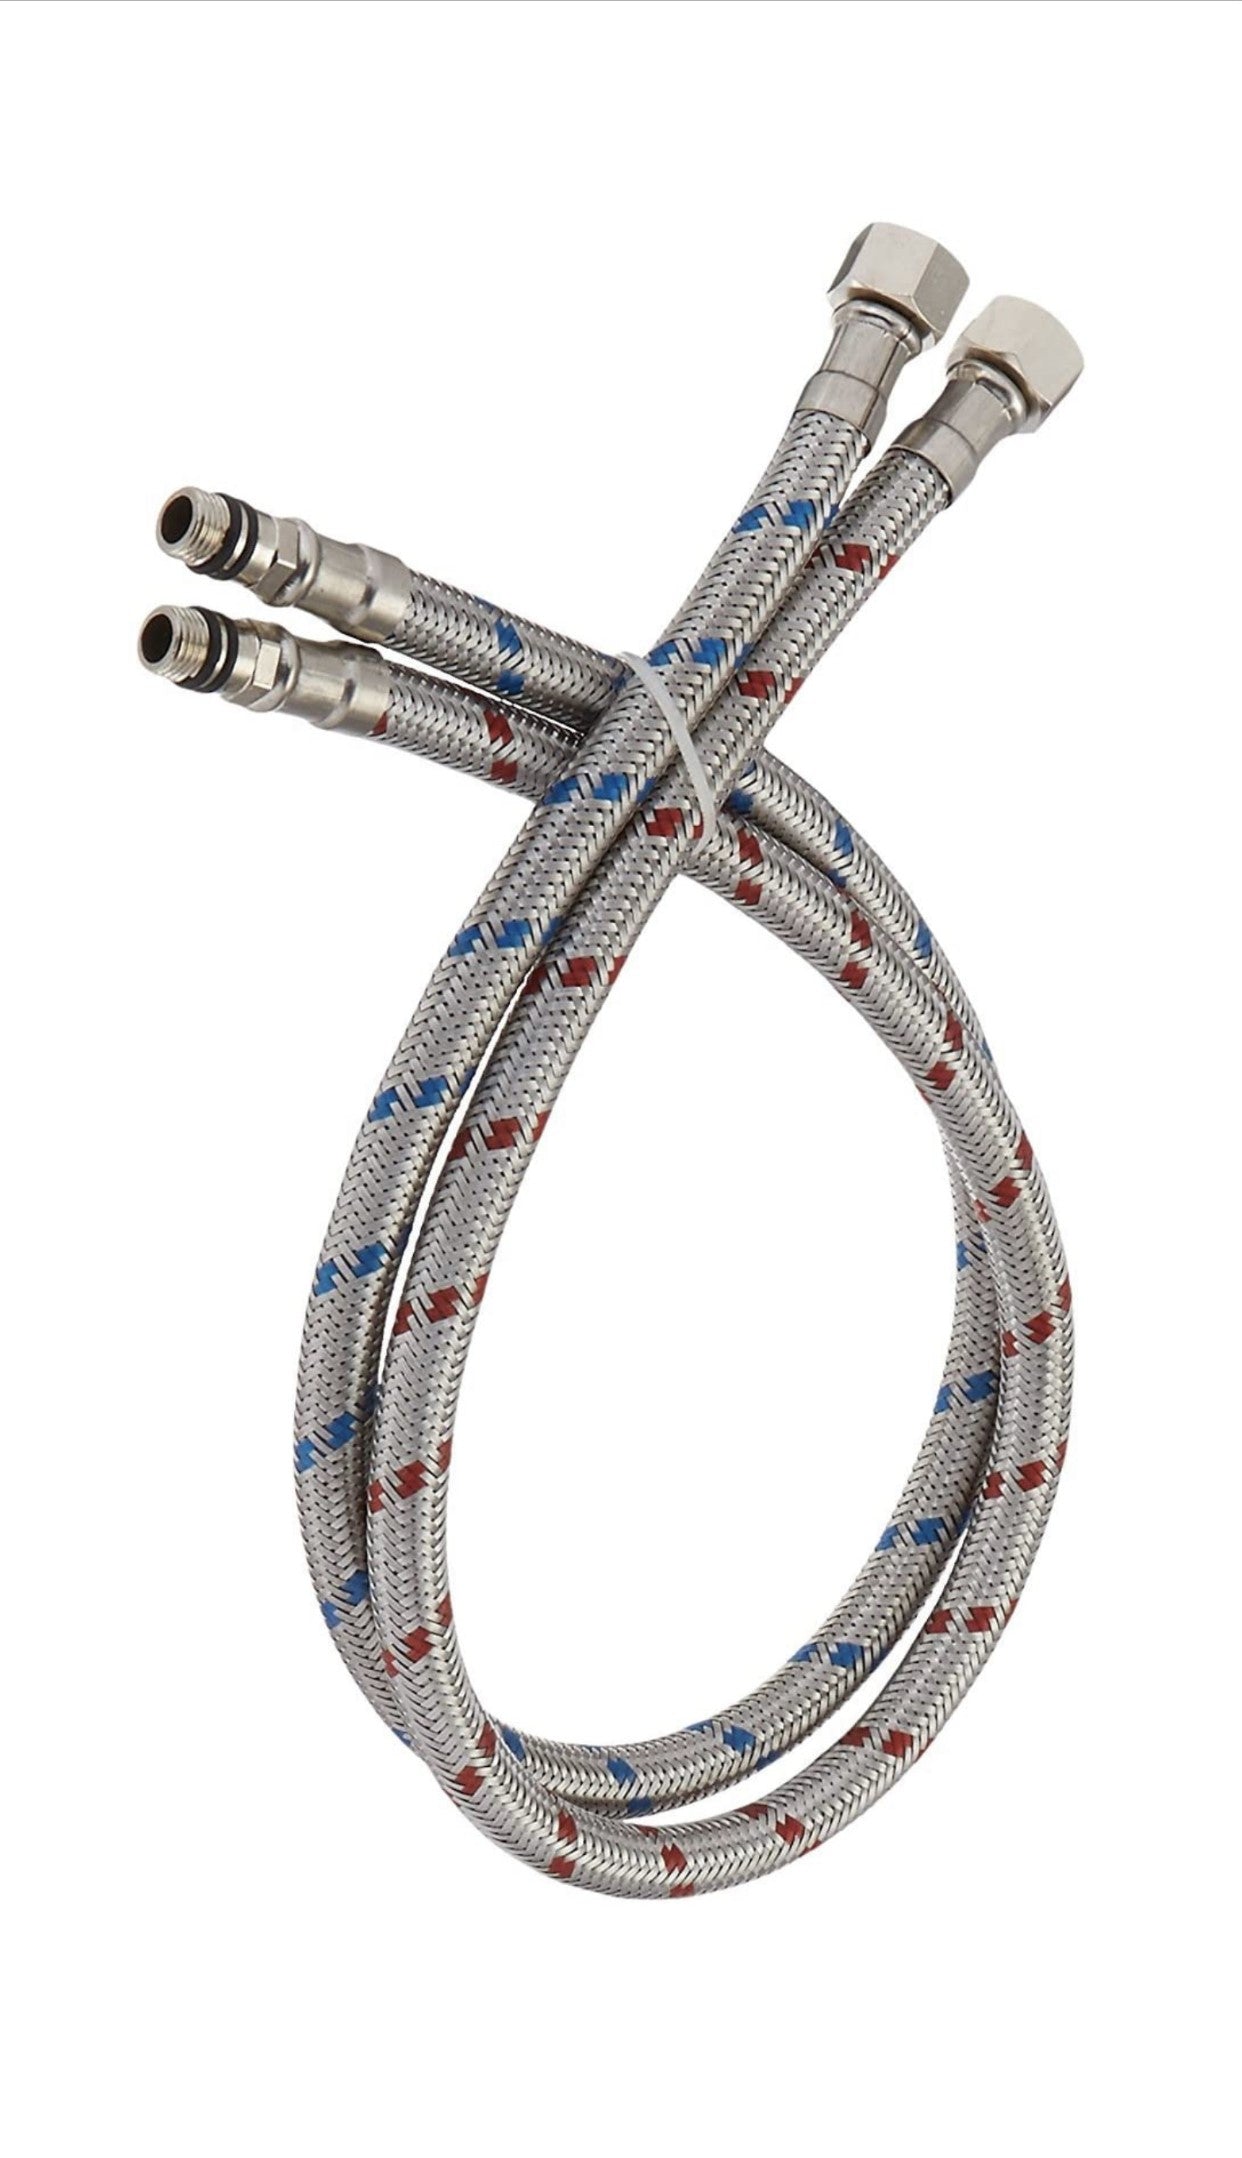 Faucet Connector Braided Stainless Steel Water Supply Hoses 23" Length, 8MM Male, 9/16 Inches Female